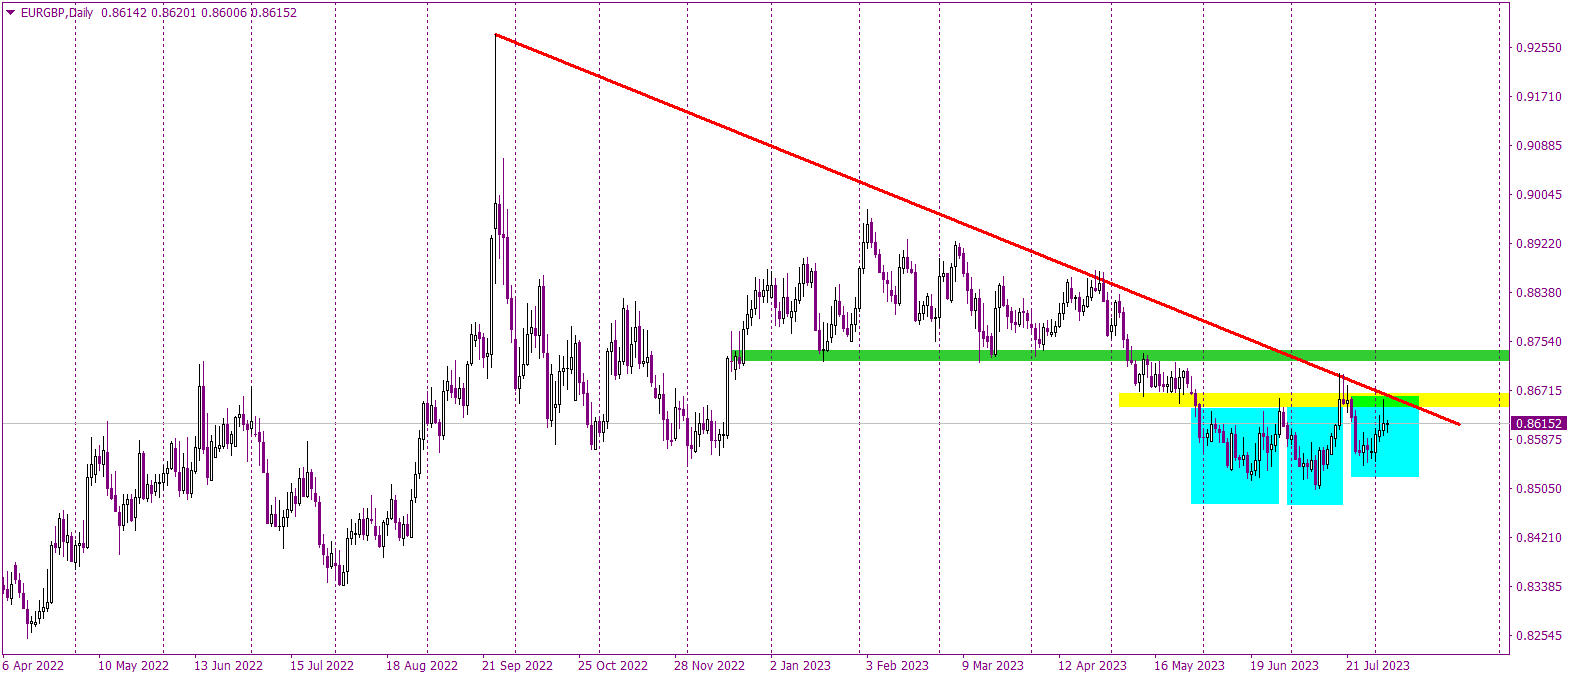 EURGBP Technical Analysis: A Crucial Resistance Zone In Focus